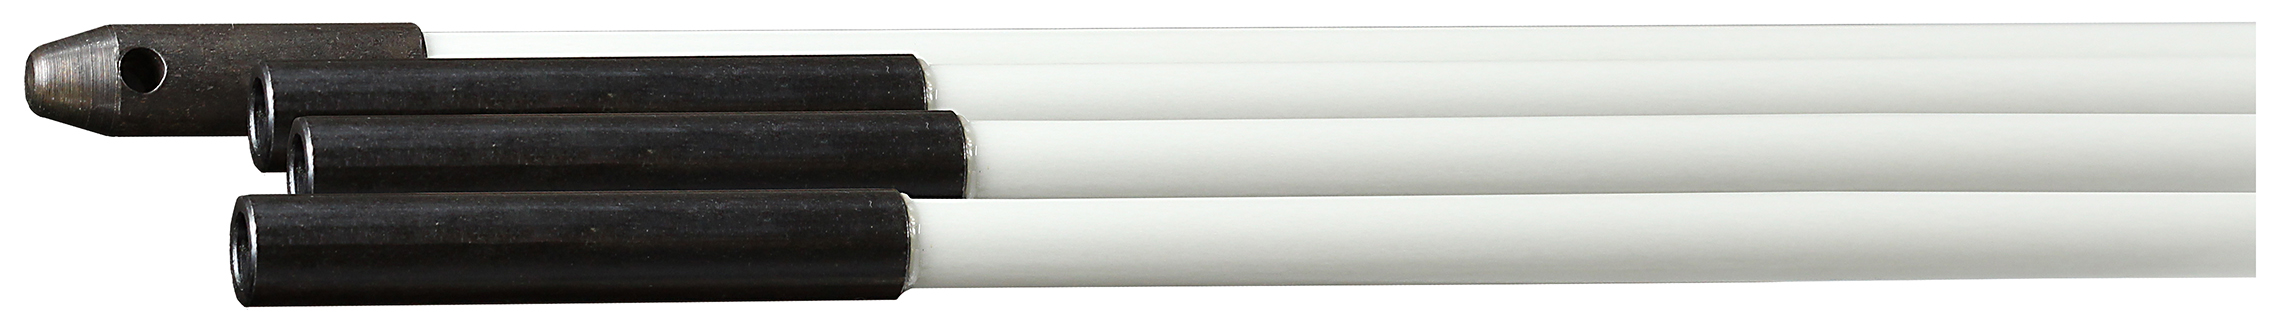 Quick Stick Rod, Pulling Eye and Hook mounting, High Strength Low Weight construction, Fiberglass material, 1/4 in. diameter, 24 ft. length, Four White